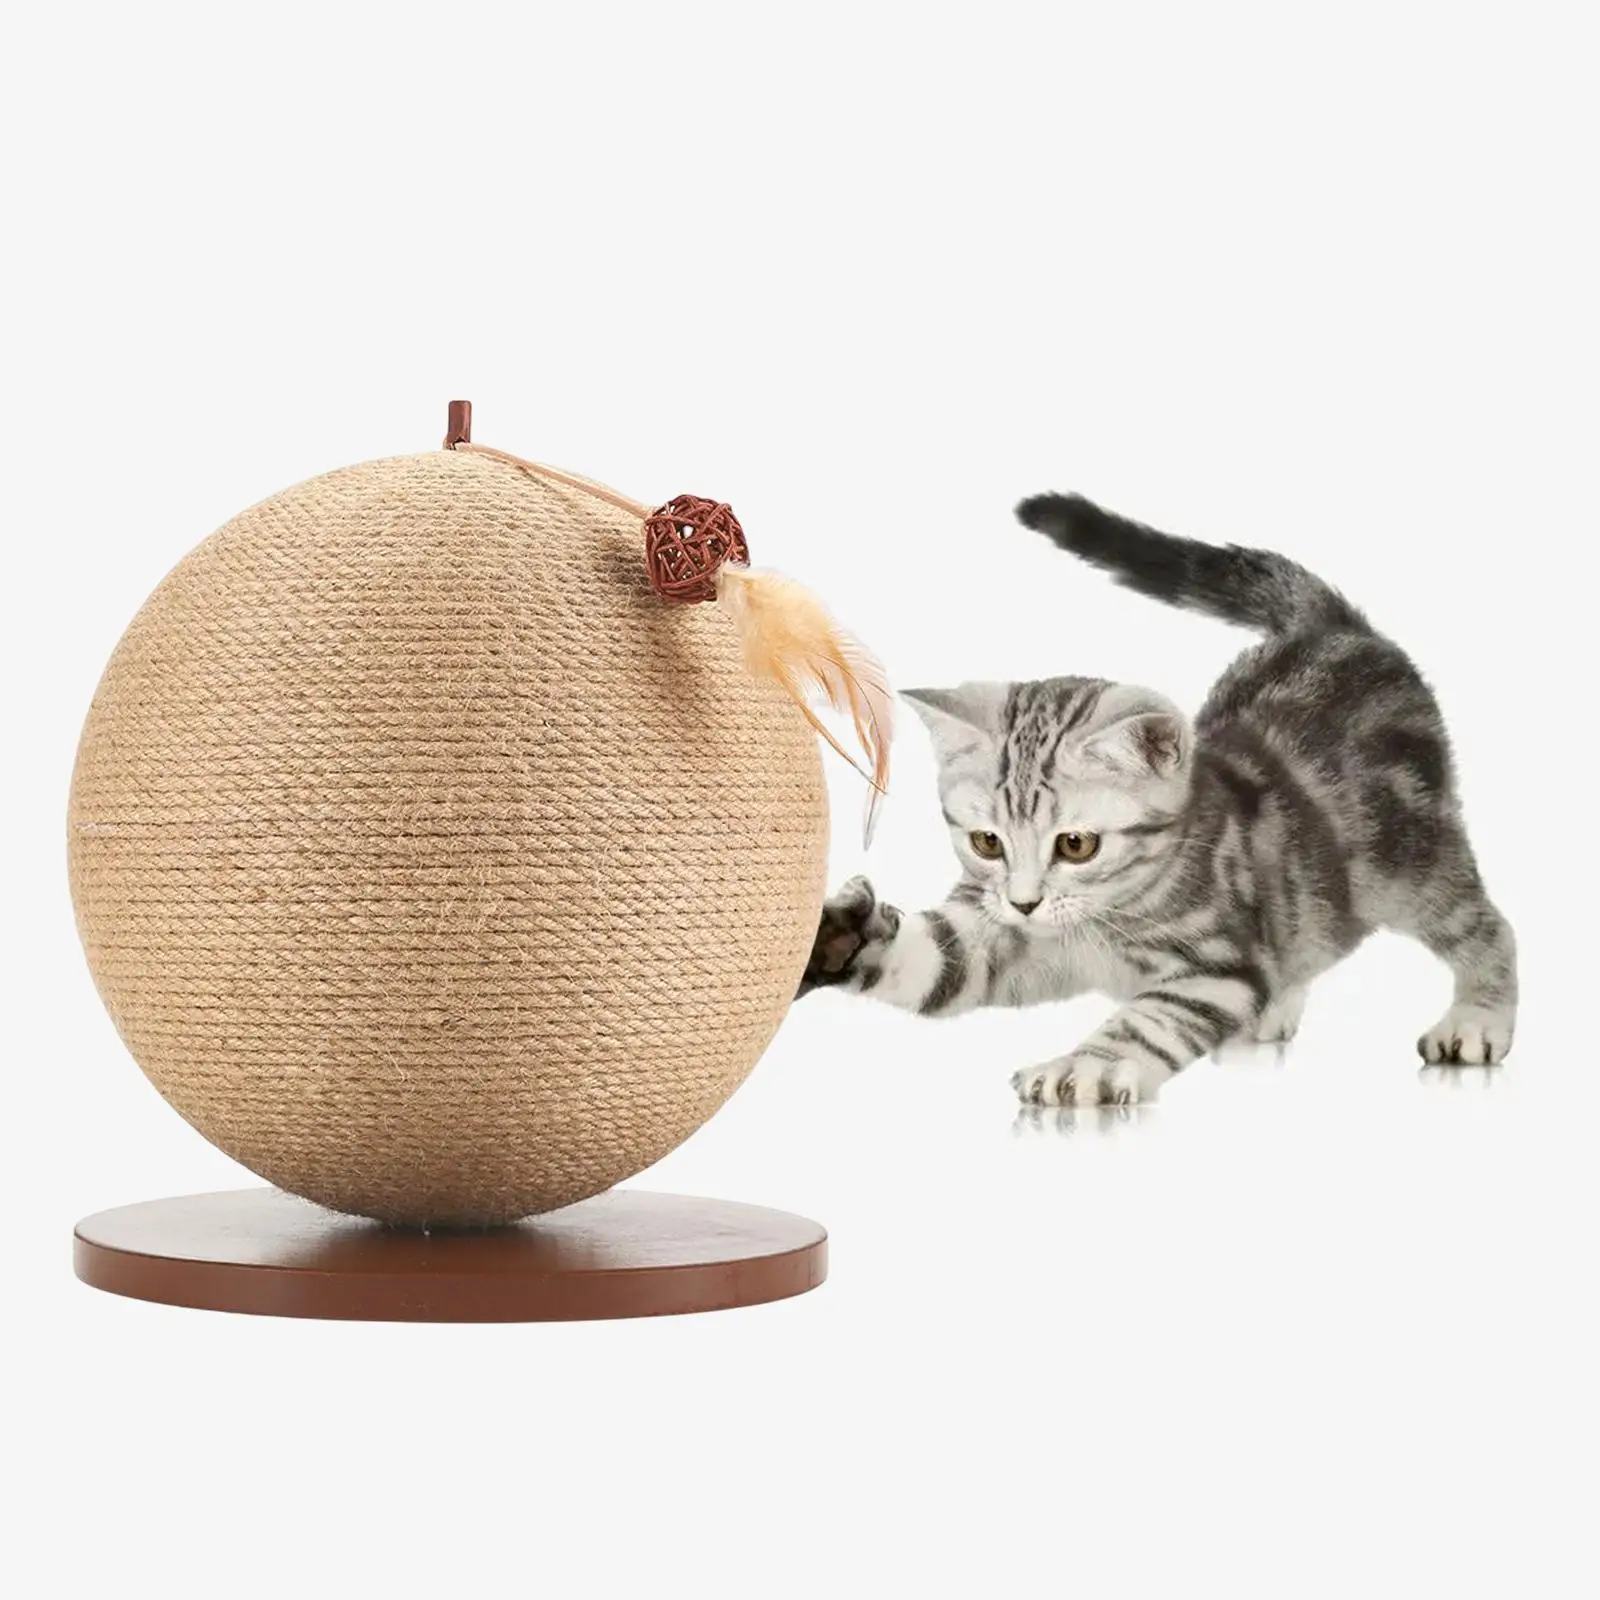 Funny Cat Scratching Ball Pet Supplies Accessories Rolling Ball Kitten Toys for Cats Kittens Training Indoor Pet Exercise